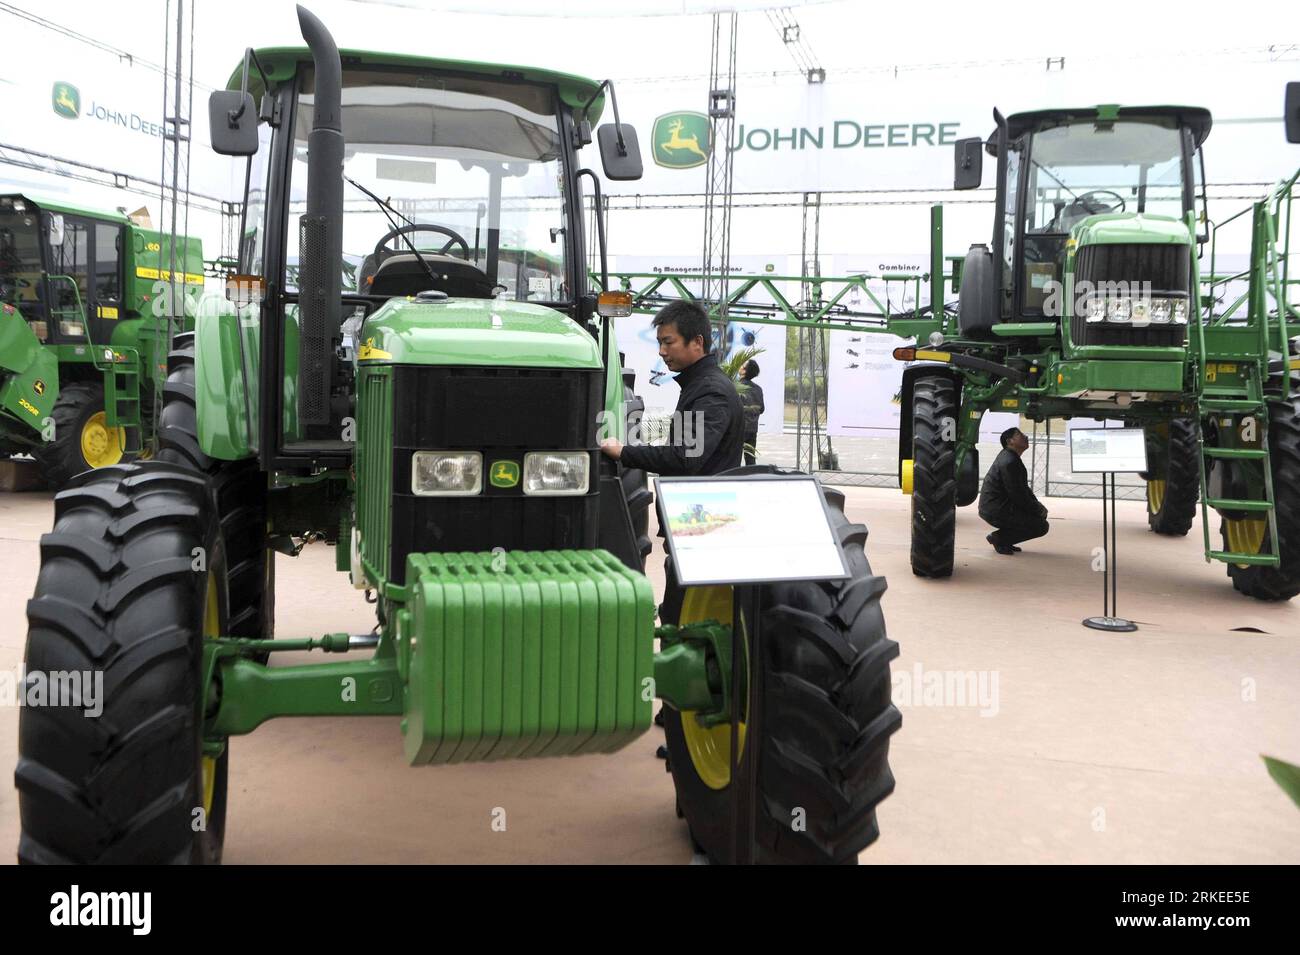 Bildnummer: 55244088  Datum: 07.04.2011  Copyright: imago/Xinhua (110407) -- NANJING, April 7, 2011 (Xinhua) -- Tractors are seen during AGMA China 2011 in Nanjing, capital of east China s Jiangsu Province, April 7, 2011. AGMA China 2011, a three-day international farm machinery fair, kicked off here Thursday, with the participation of more than 360 exhibitors from 21 countries and regions. (Xinhua/Dong Jinlin) (ljh)  CHINA-NANJING-AGMA CHINA 2011-OPEN (CN) PUBLICATIONxNOTxINxCHN Wirtschaft Landwirtschaft Messe Agrarmesse Landwirtschaftsmesse Objekte kbdig xsk 2011 quer o0 Traktor, John Deere Stock Photo